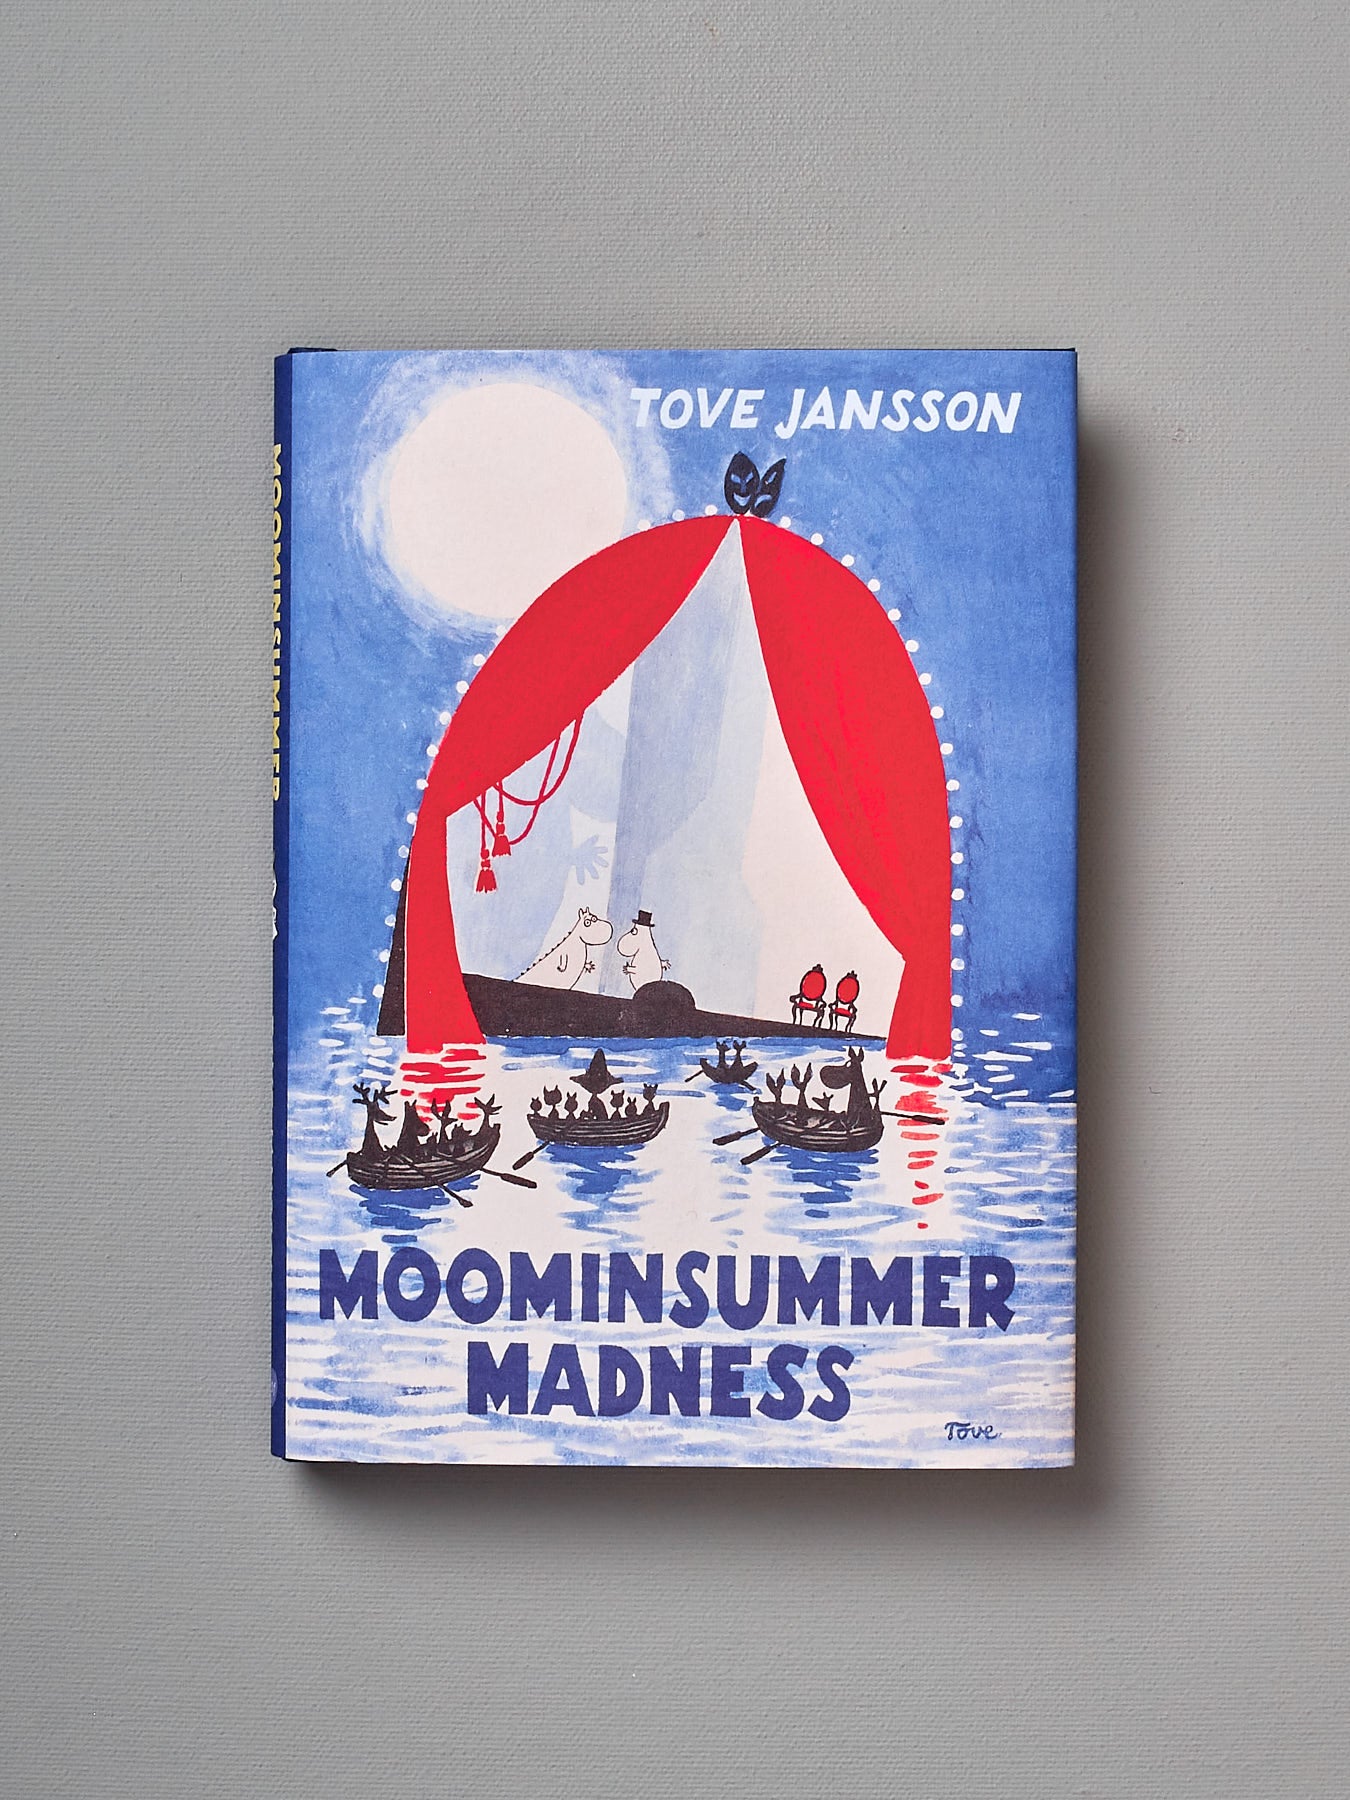 Moominsummer Madness" by Tove Jansson.